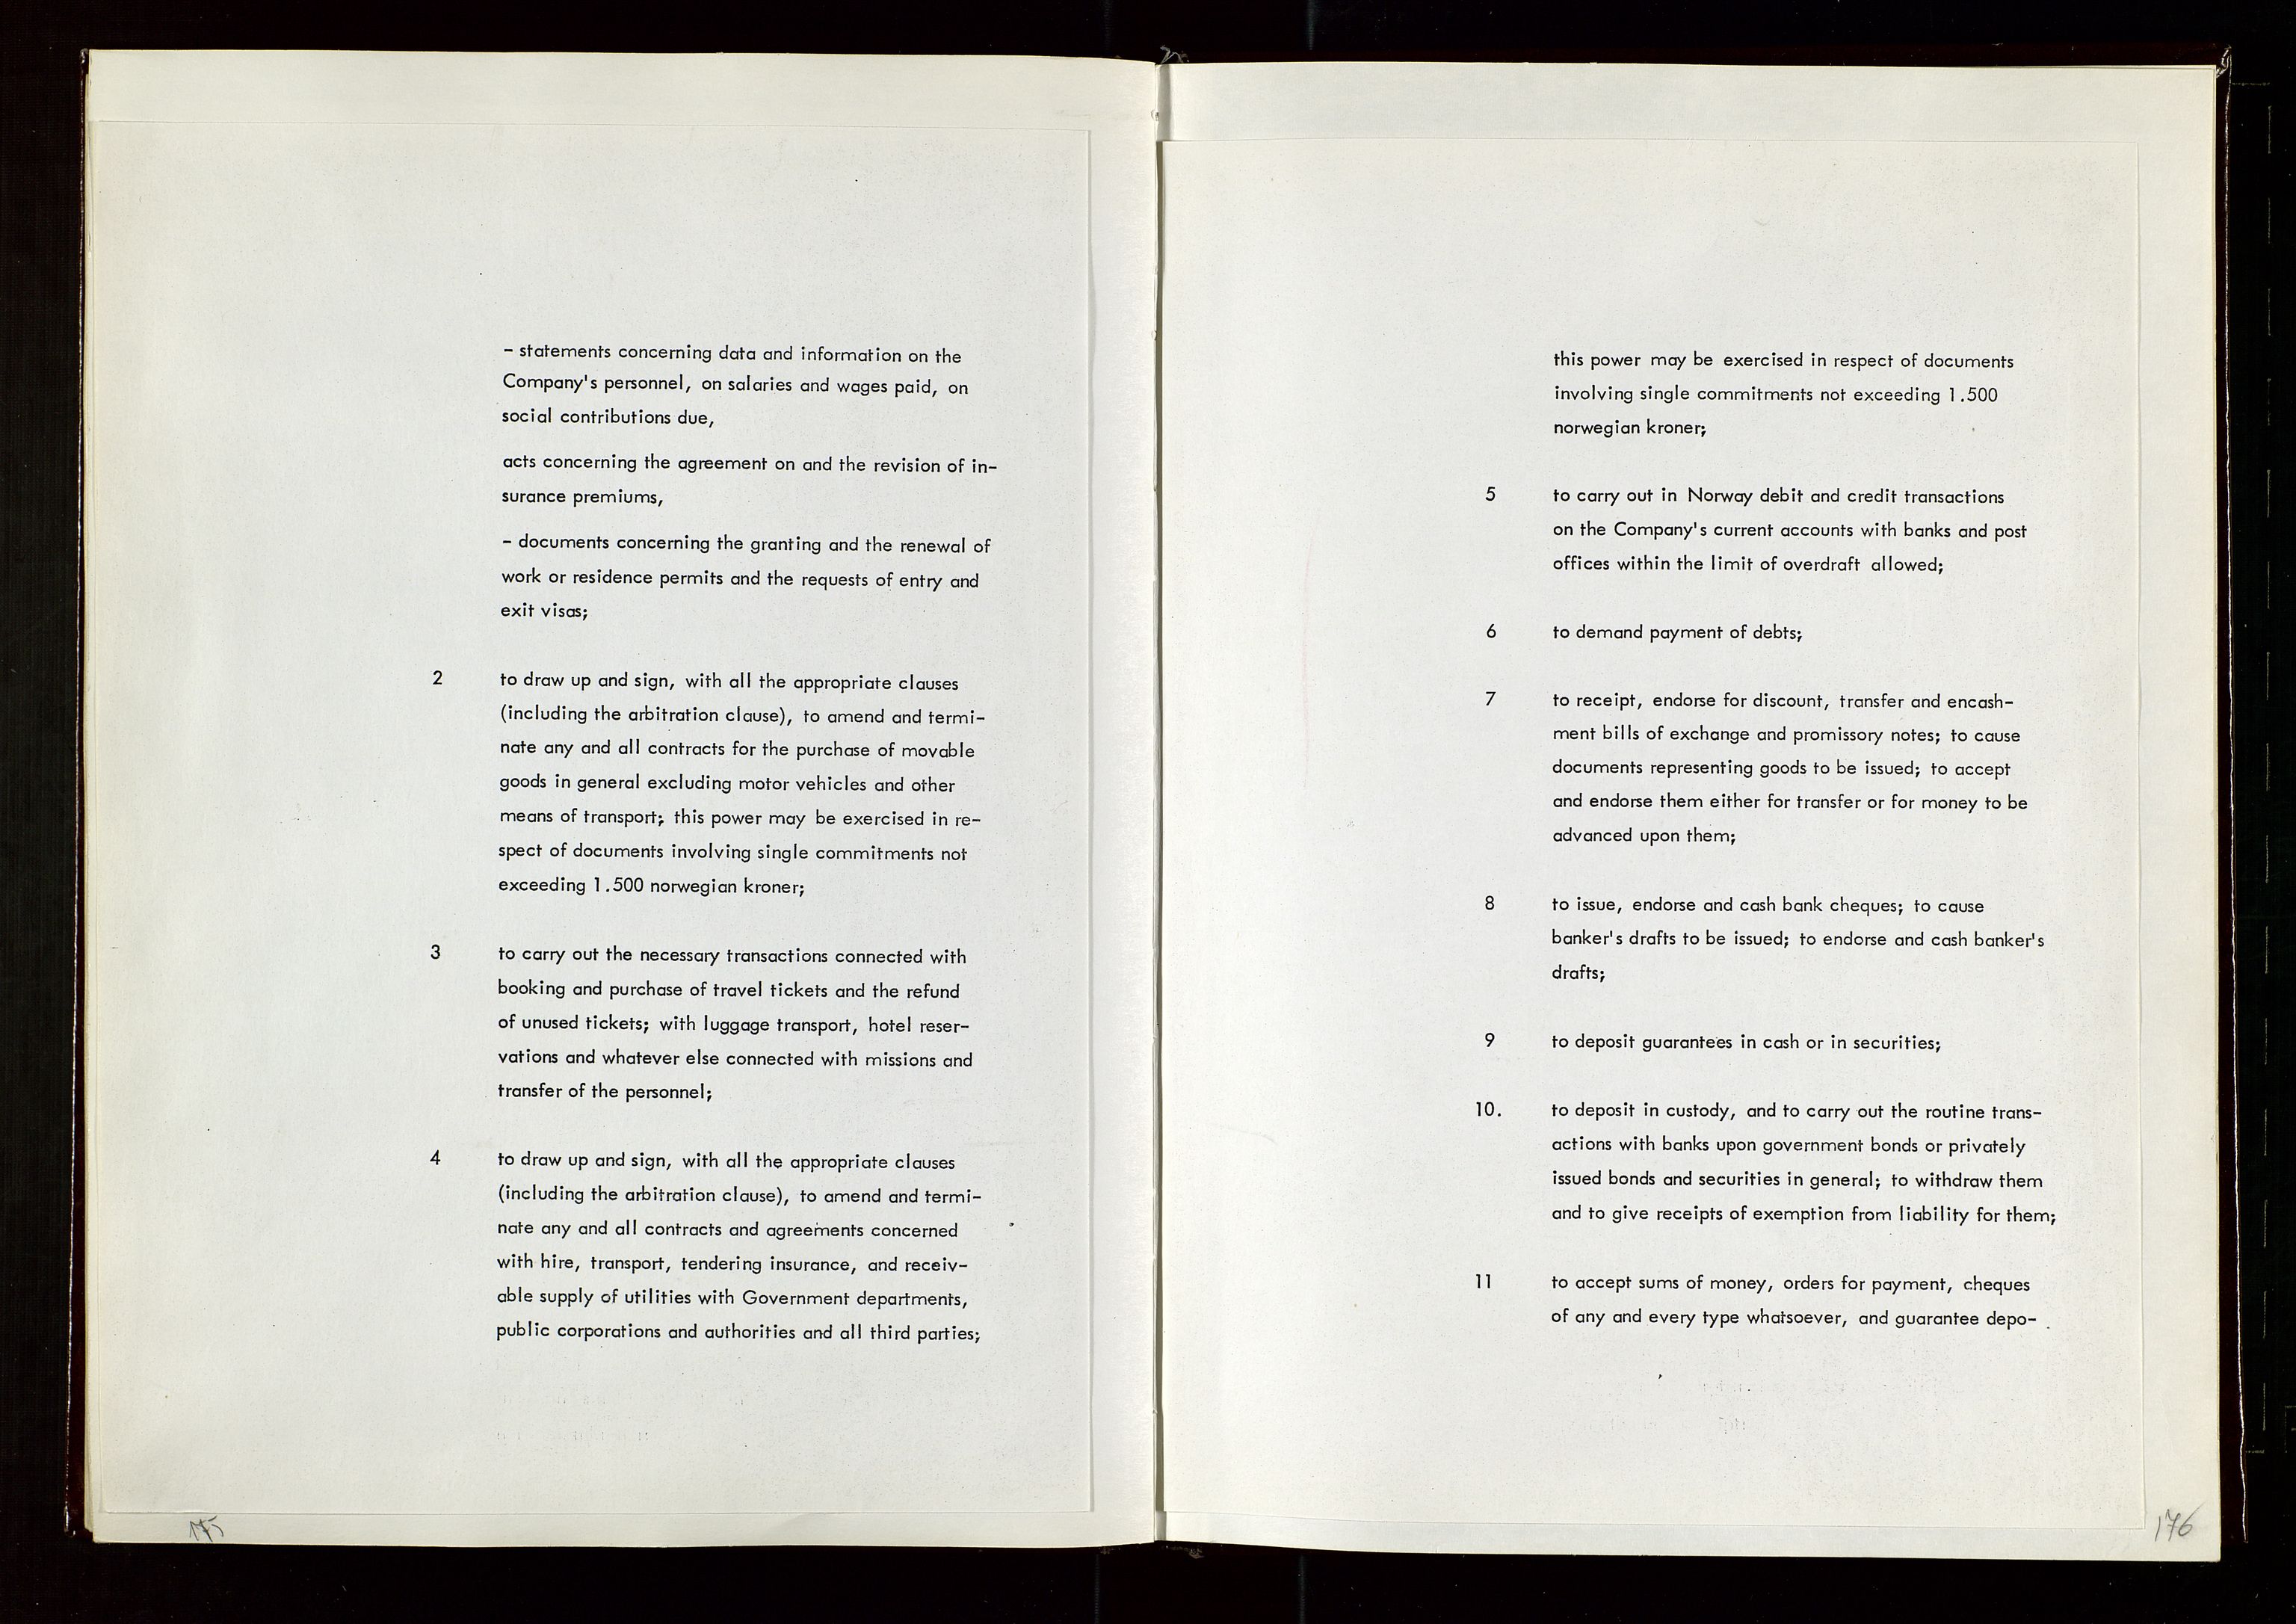 Pa 1583 - Norsk Agip AS, SAST/A-102138/A/Aa/L0002: General assembly and Board of Directors meeting minutes, 1972-1979, p. 175-176